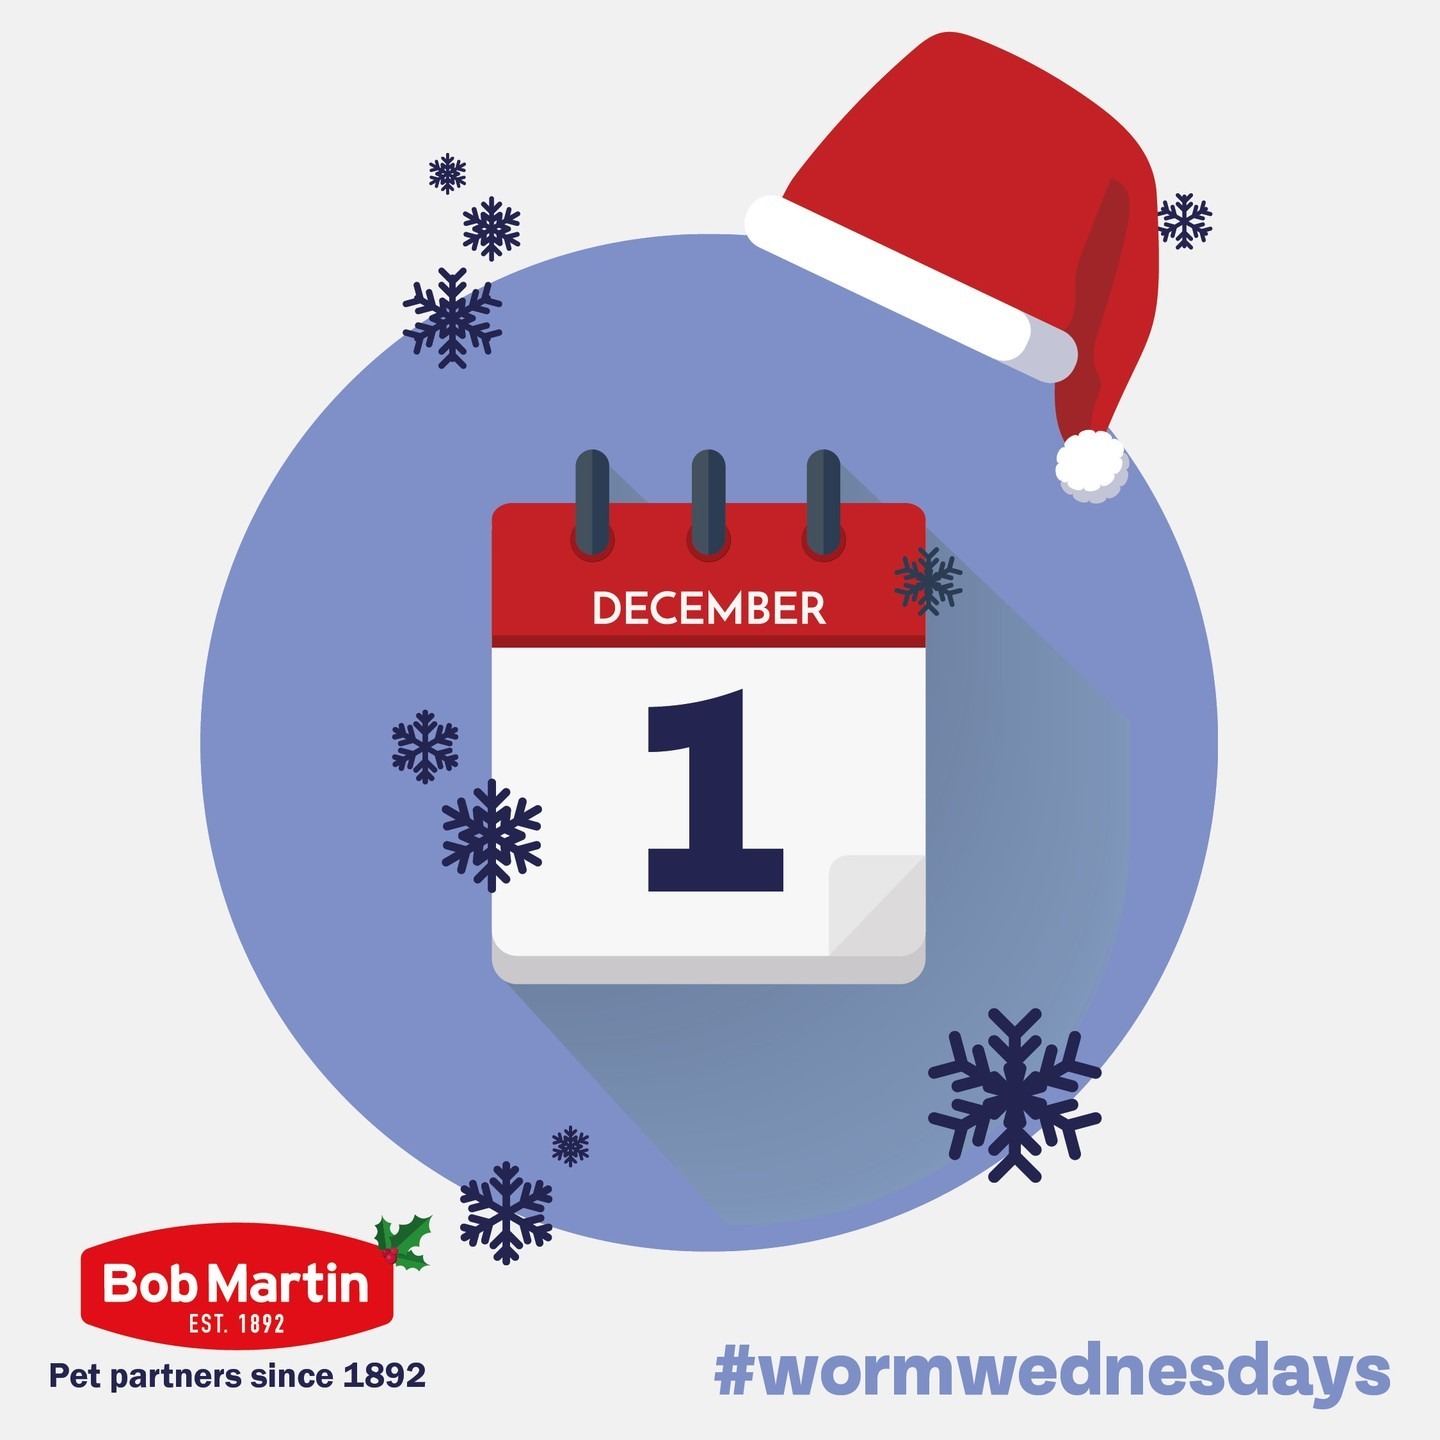 Worming your pet may not be at the top of this month’s priorities list so here is your monthly reminder! #WormWednesdays

To save you time and money, why not let us deliver your wormer direct to your door each month? Check out our Subscribe & Save option via the link in our bio.

#BobMartin #PetHealthcare #Flea #Worm #Dog #Cat #SpotOn #Pets #PetsOfInstagram #PetCare #PetTips #PetHealth #HealthyPets #ActivePets #festive #christmastime